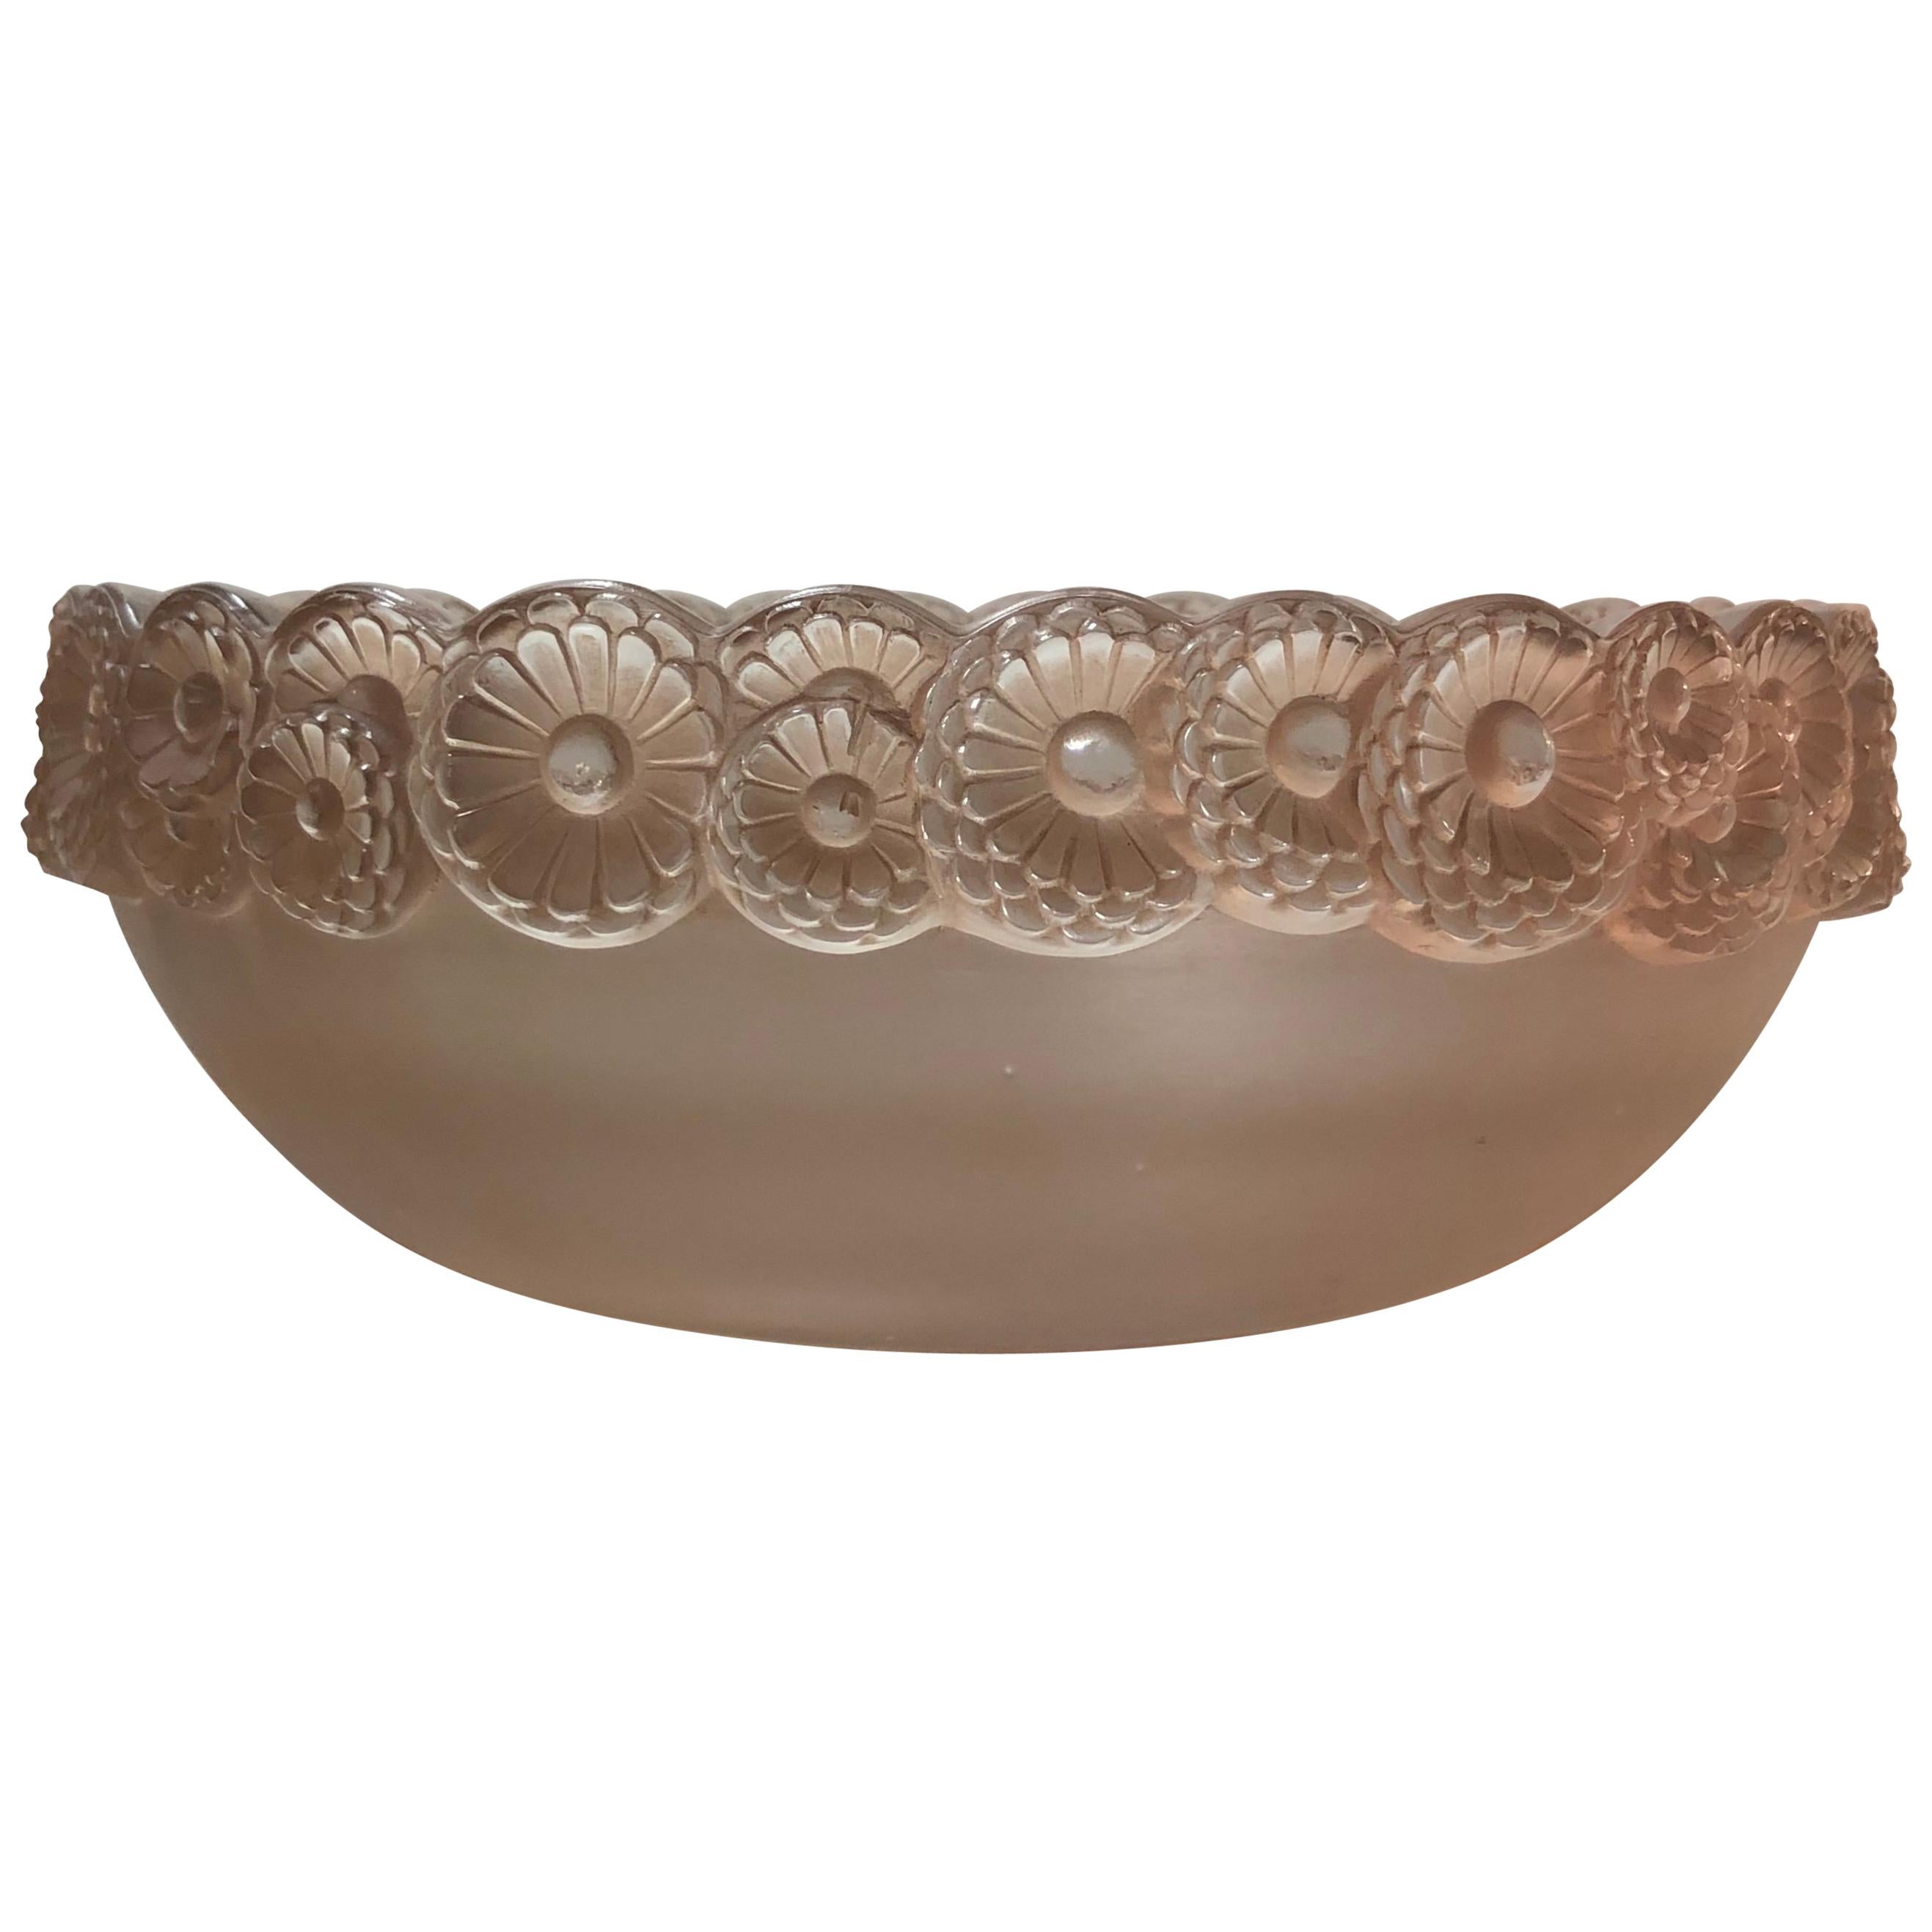 1931 René Lalique Soucy Bowl Frosted and Stained Glass, Daisy Flowers